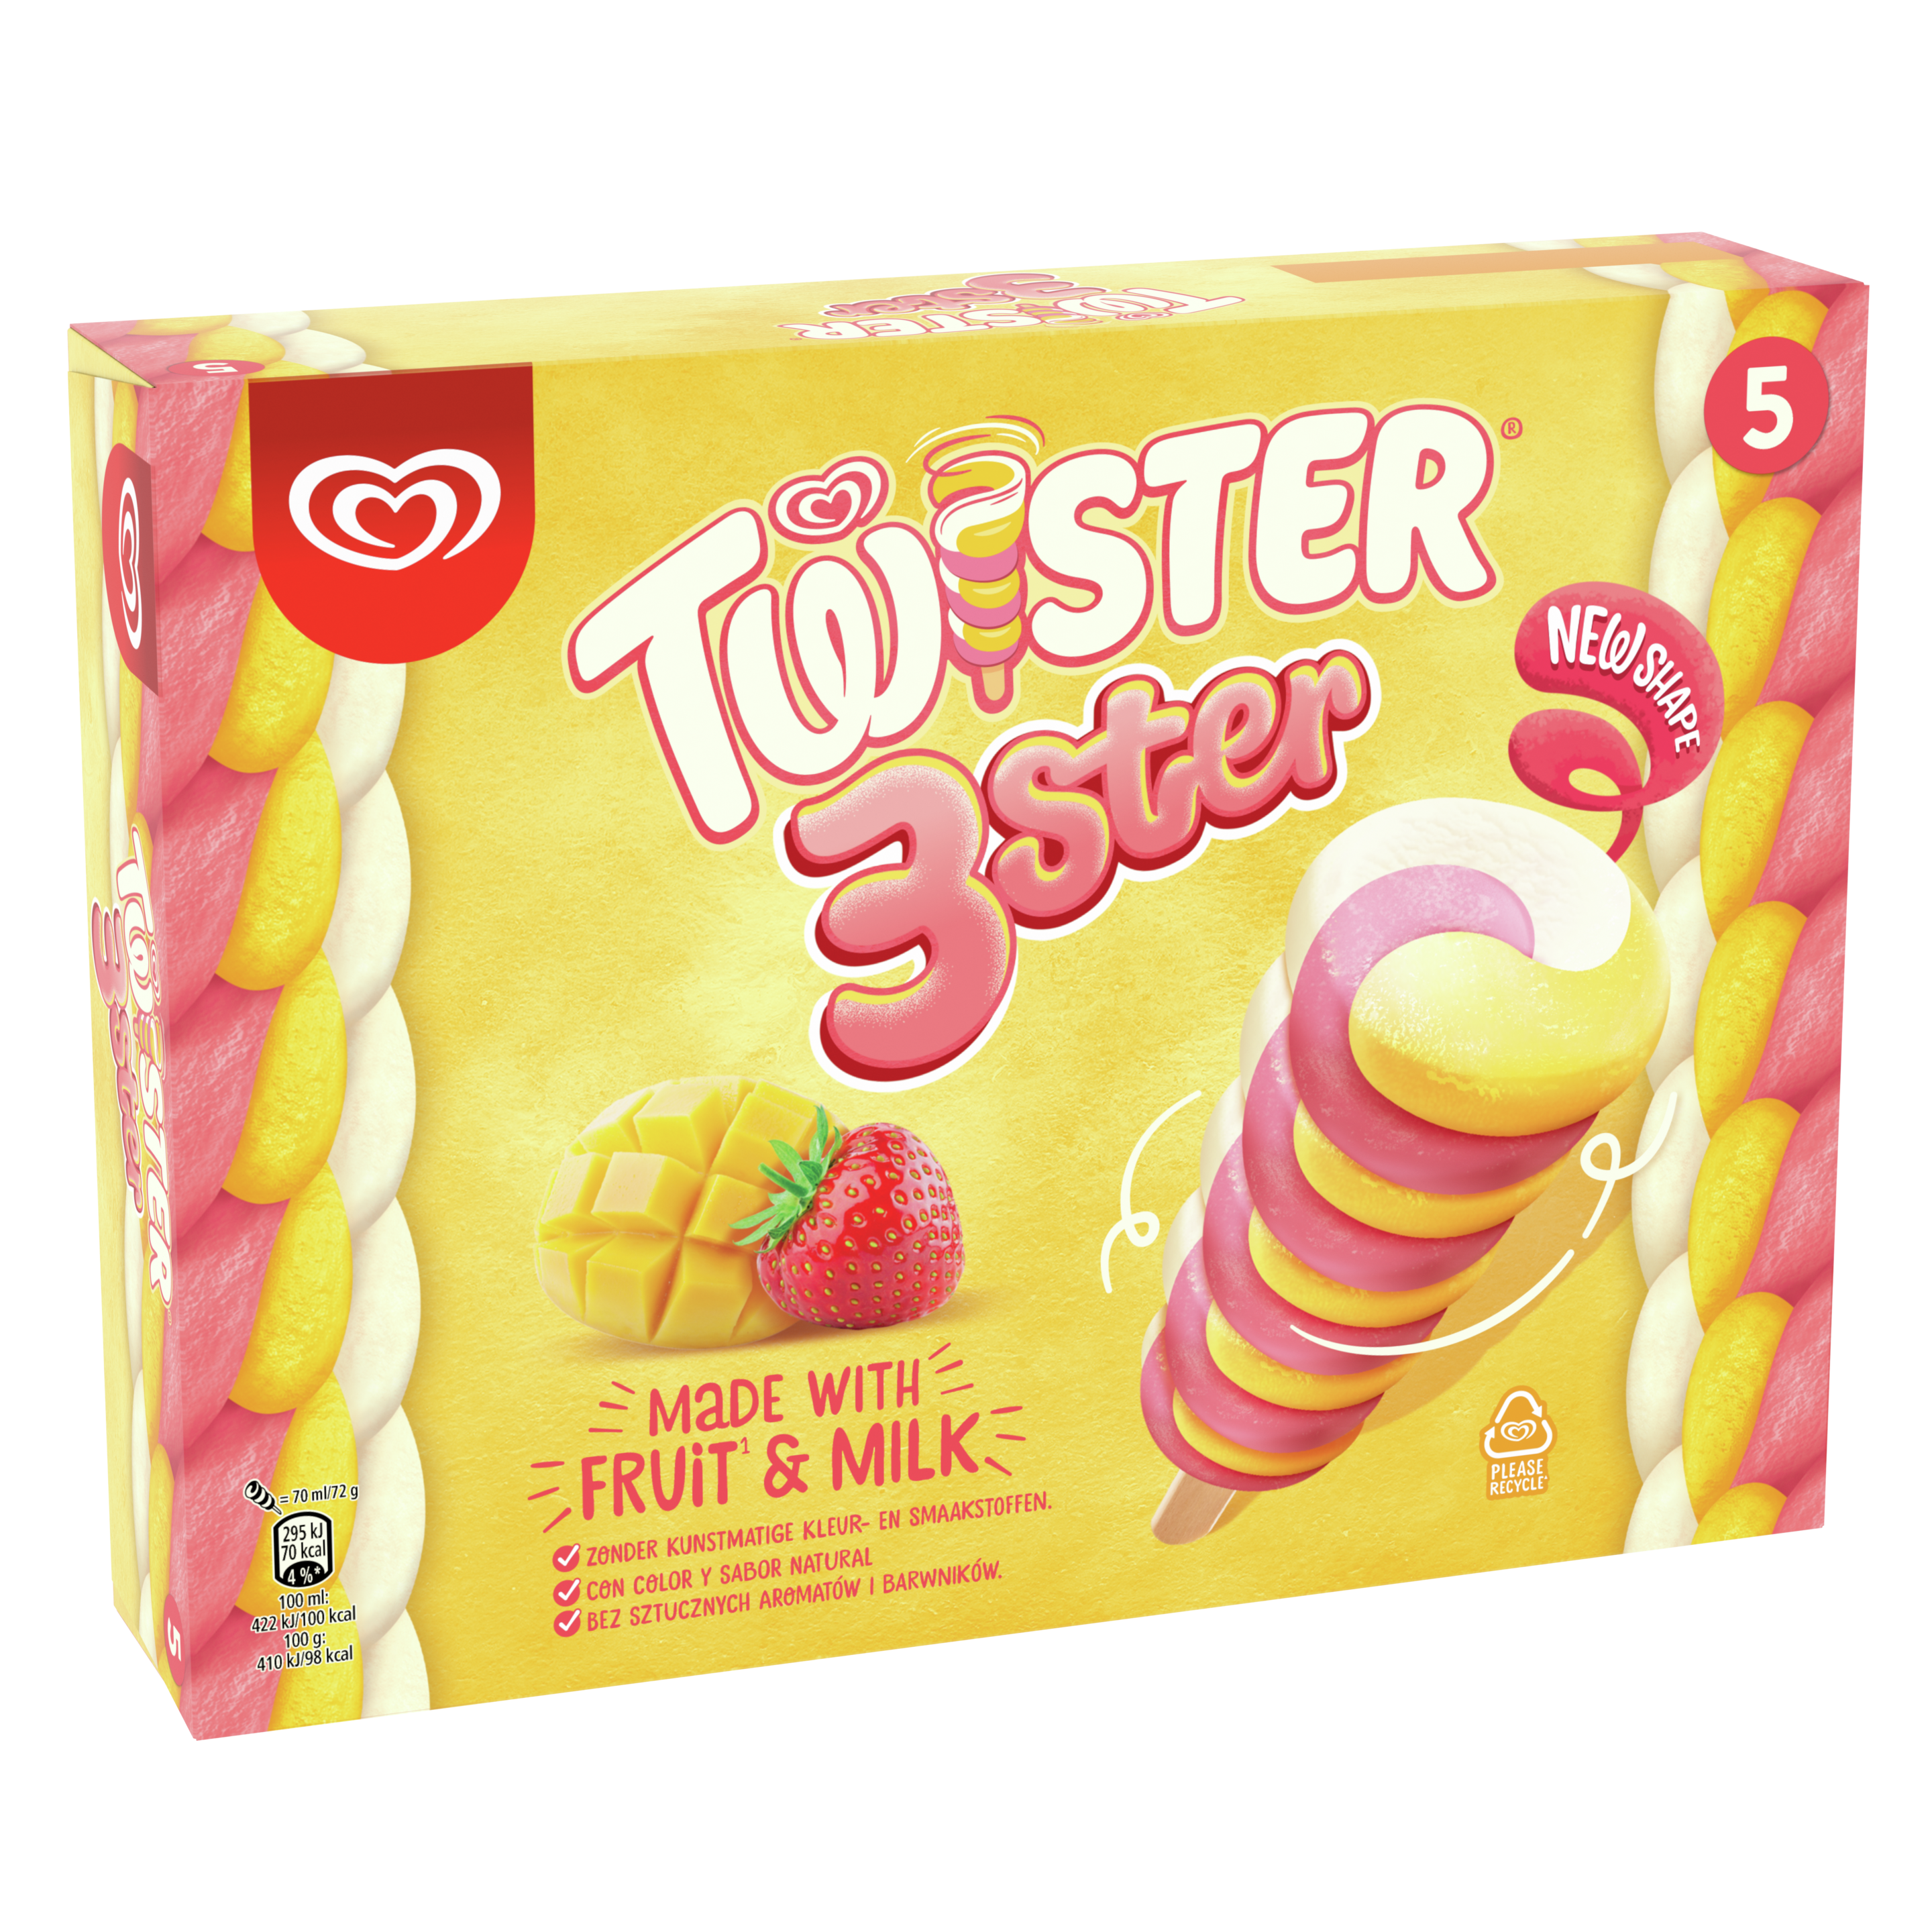 Twister 3ster